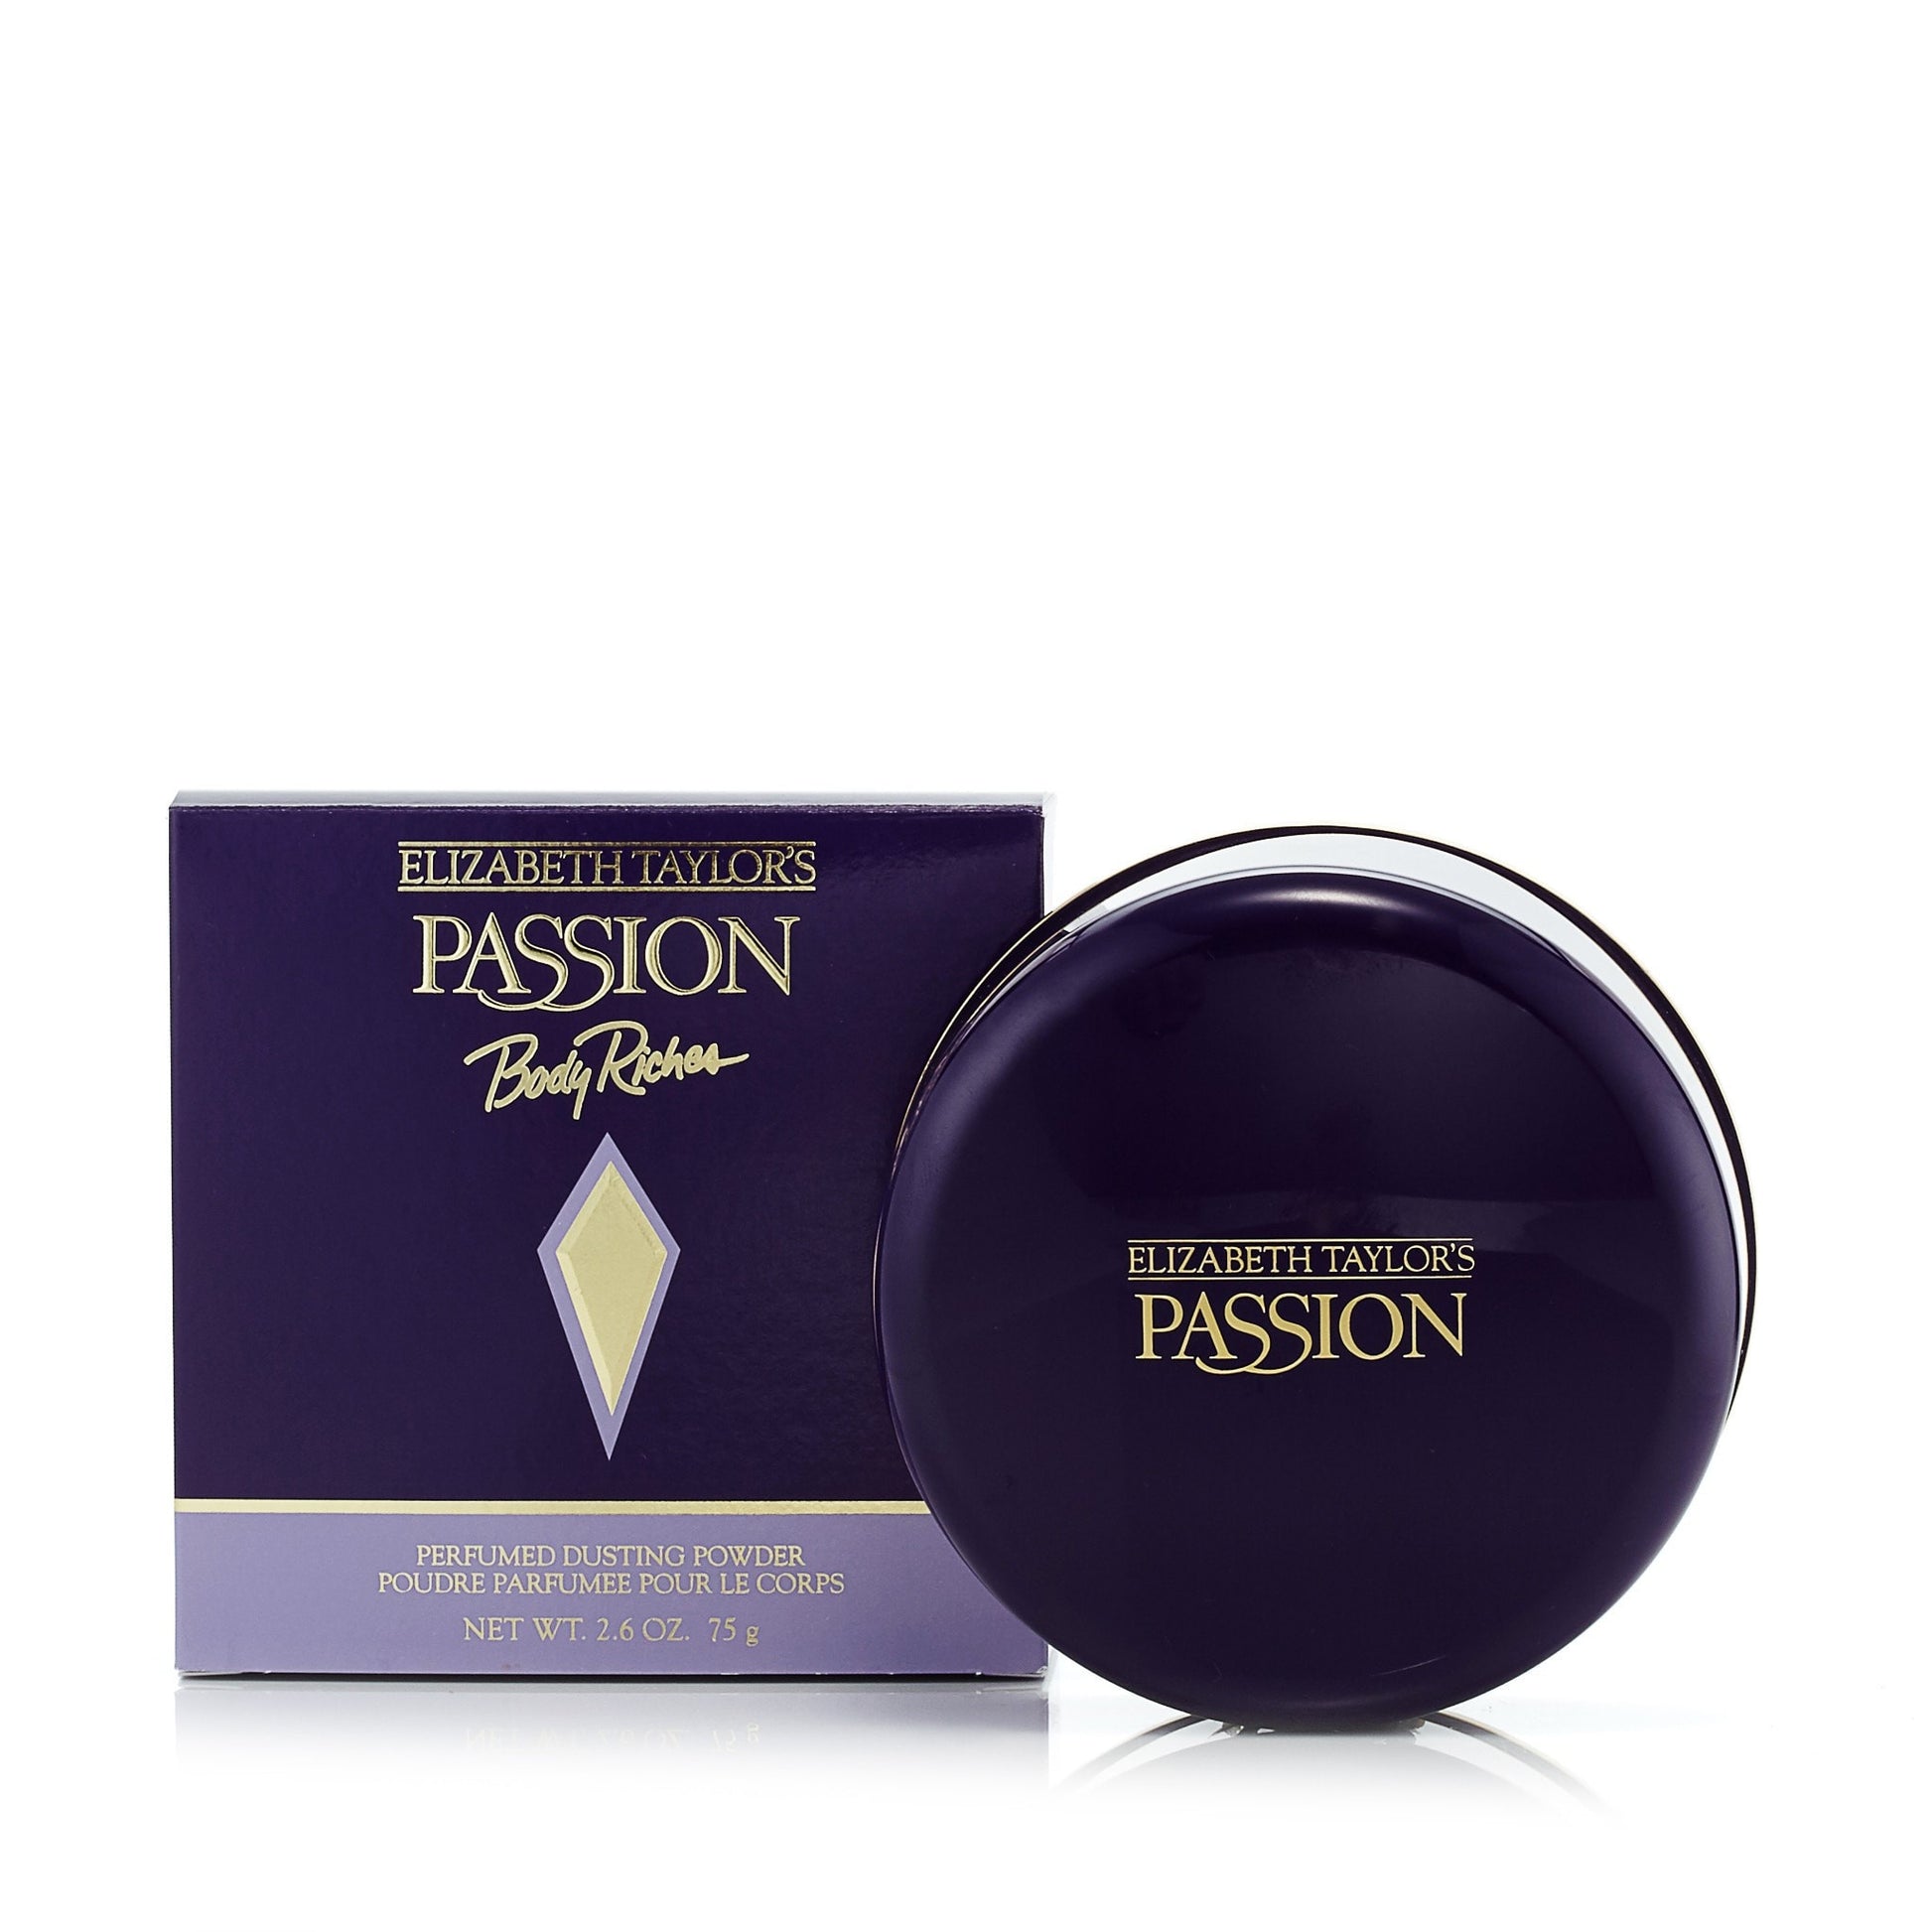 Passion Dusting Powder for Women by Elizabeth Taylor 2.6 oz. Click to open in modal